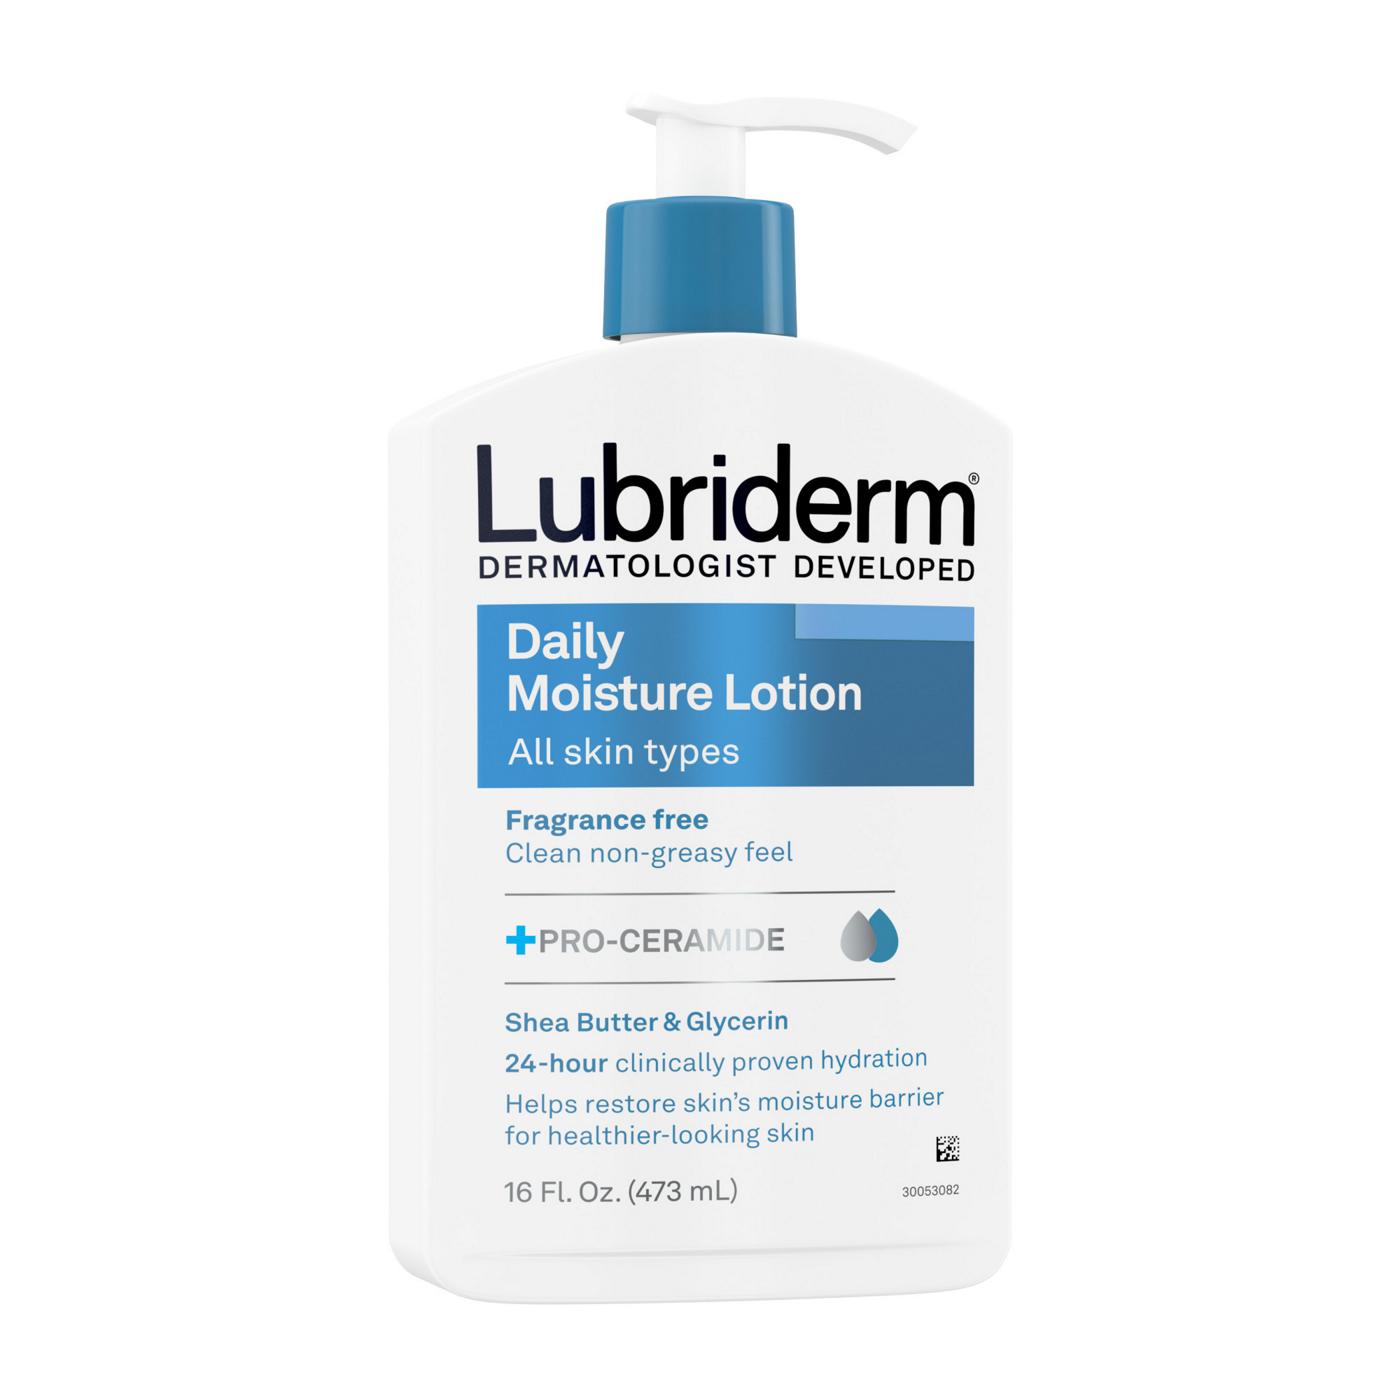 Lubriderm Fragrance-Free Daily Moisture Lotion; image 6 of 9